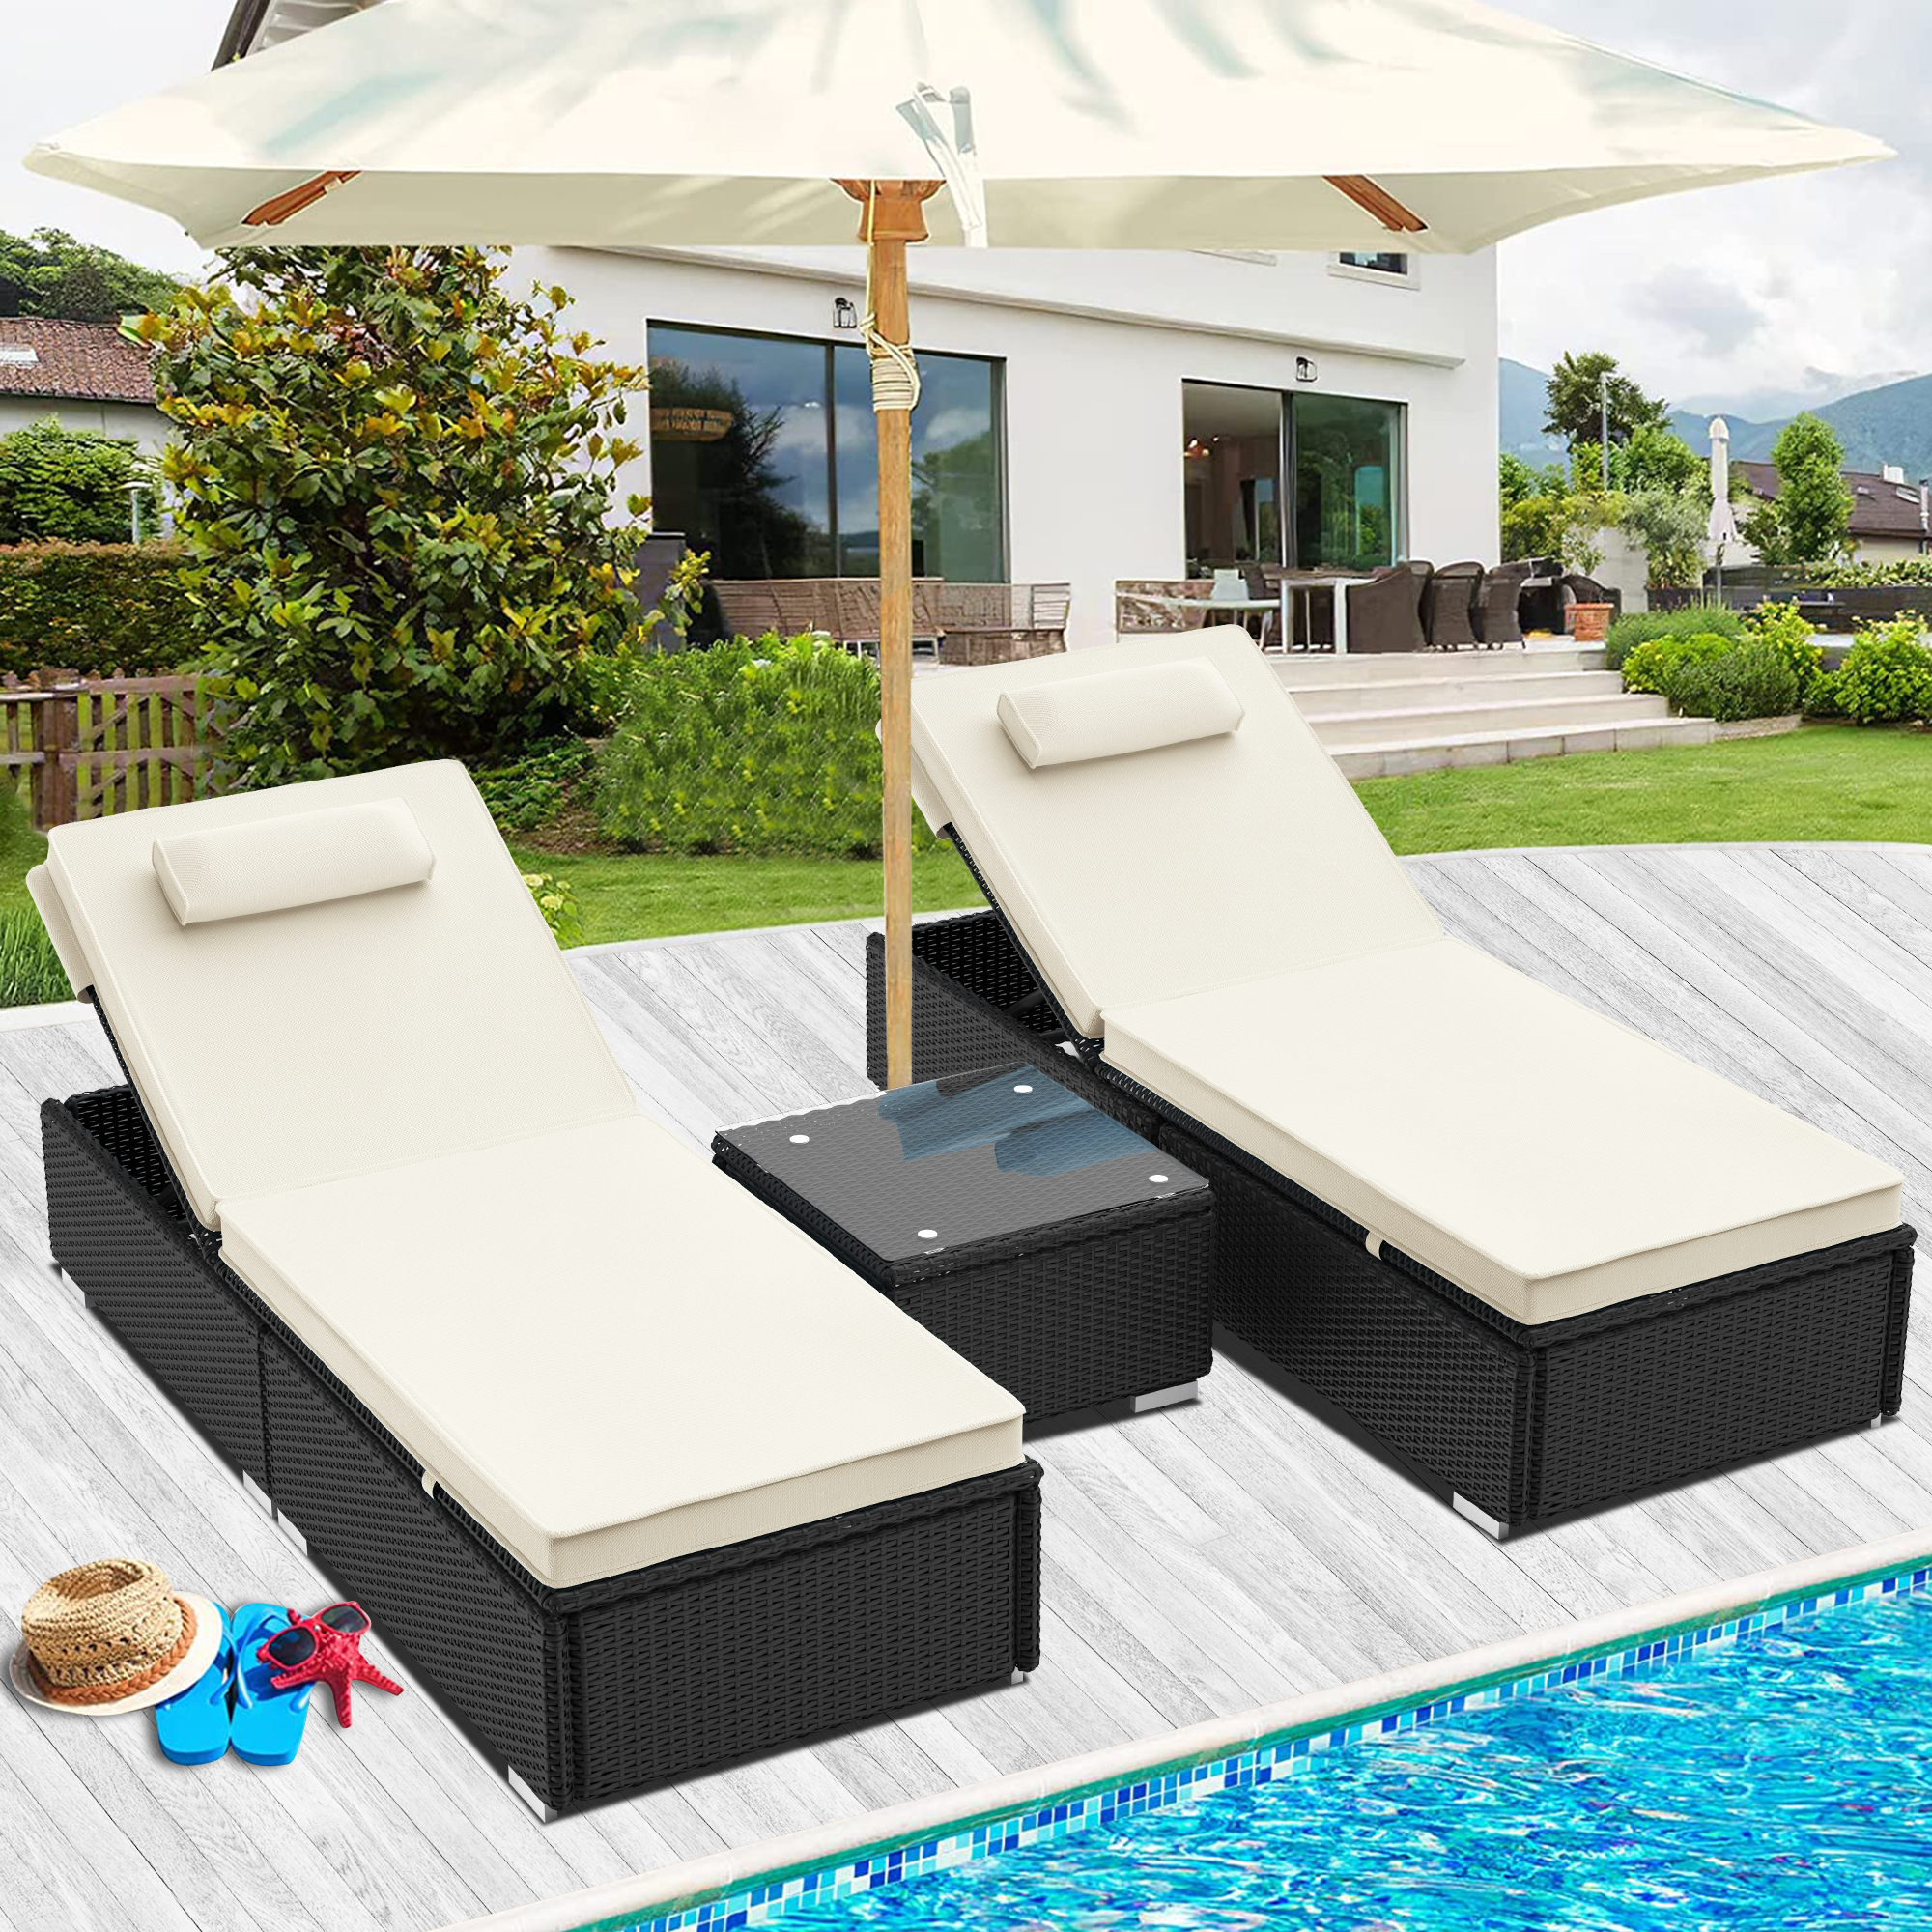 Sesslife Lounge Chairs for Outdoor Outside Lounge Chairs Set of 2, Adjustable PE Rattan Wicker Patio Pool Lounge Chair with Cushion and Side Table, for Poolside Backyard Deck Porch Garden, Beige - image 1 of 7